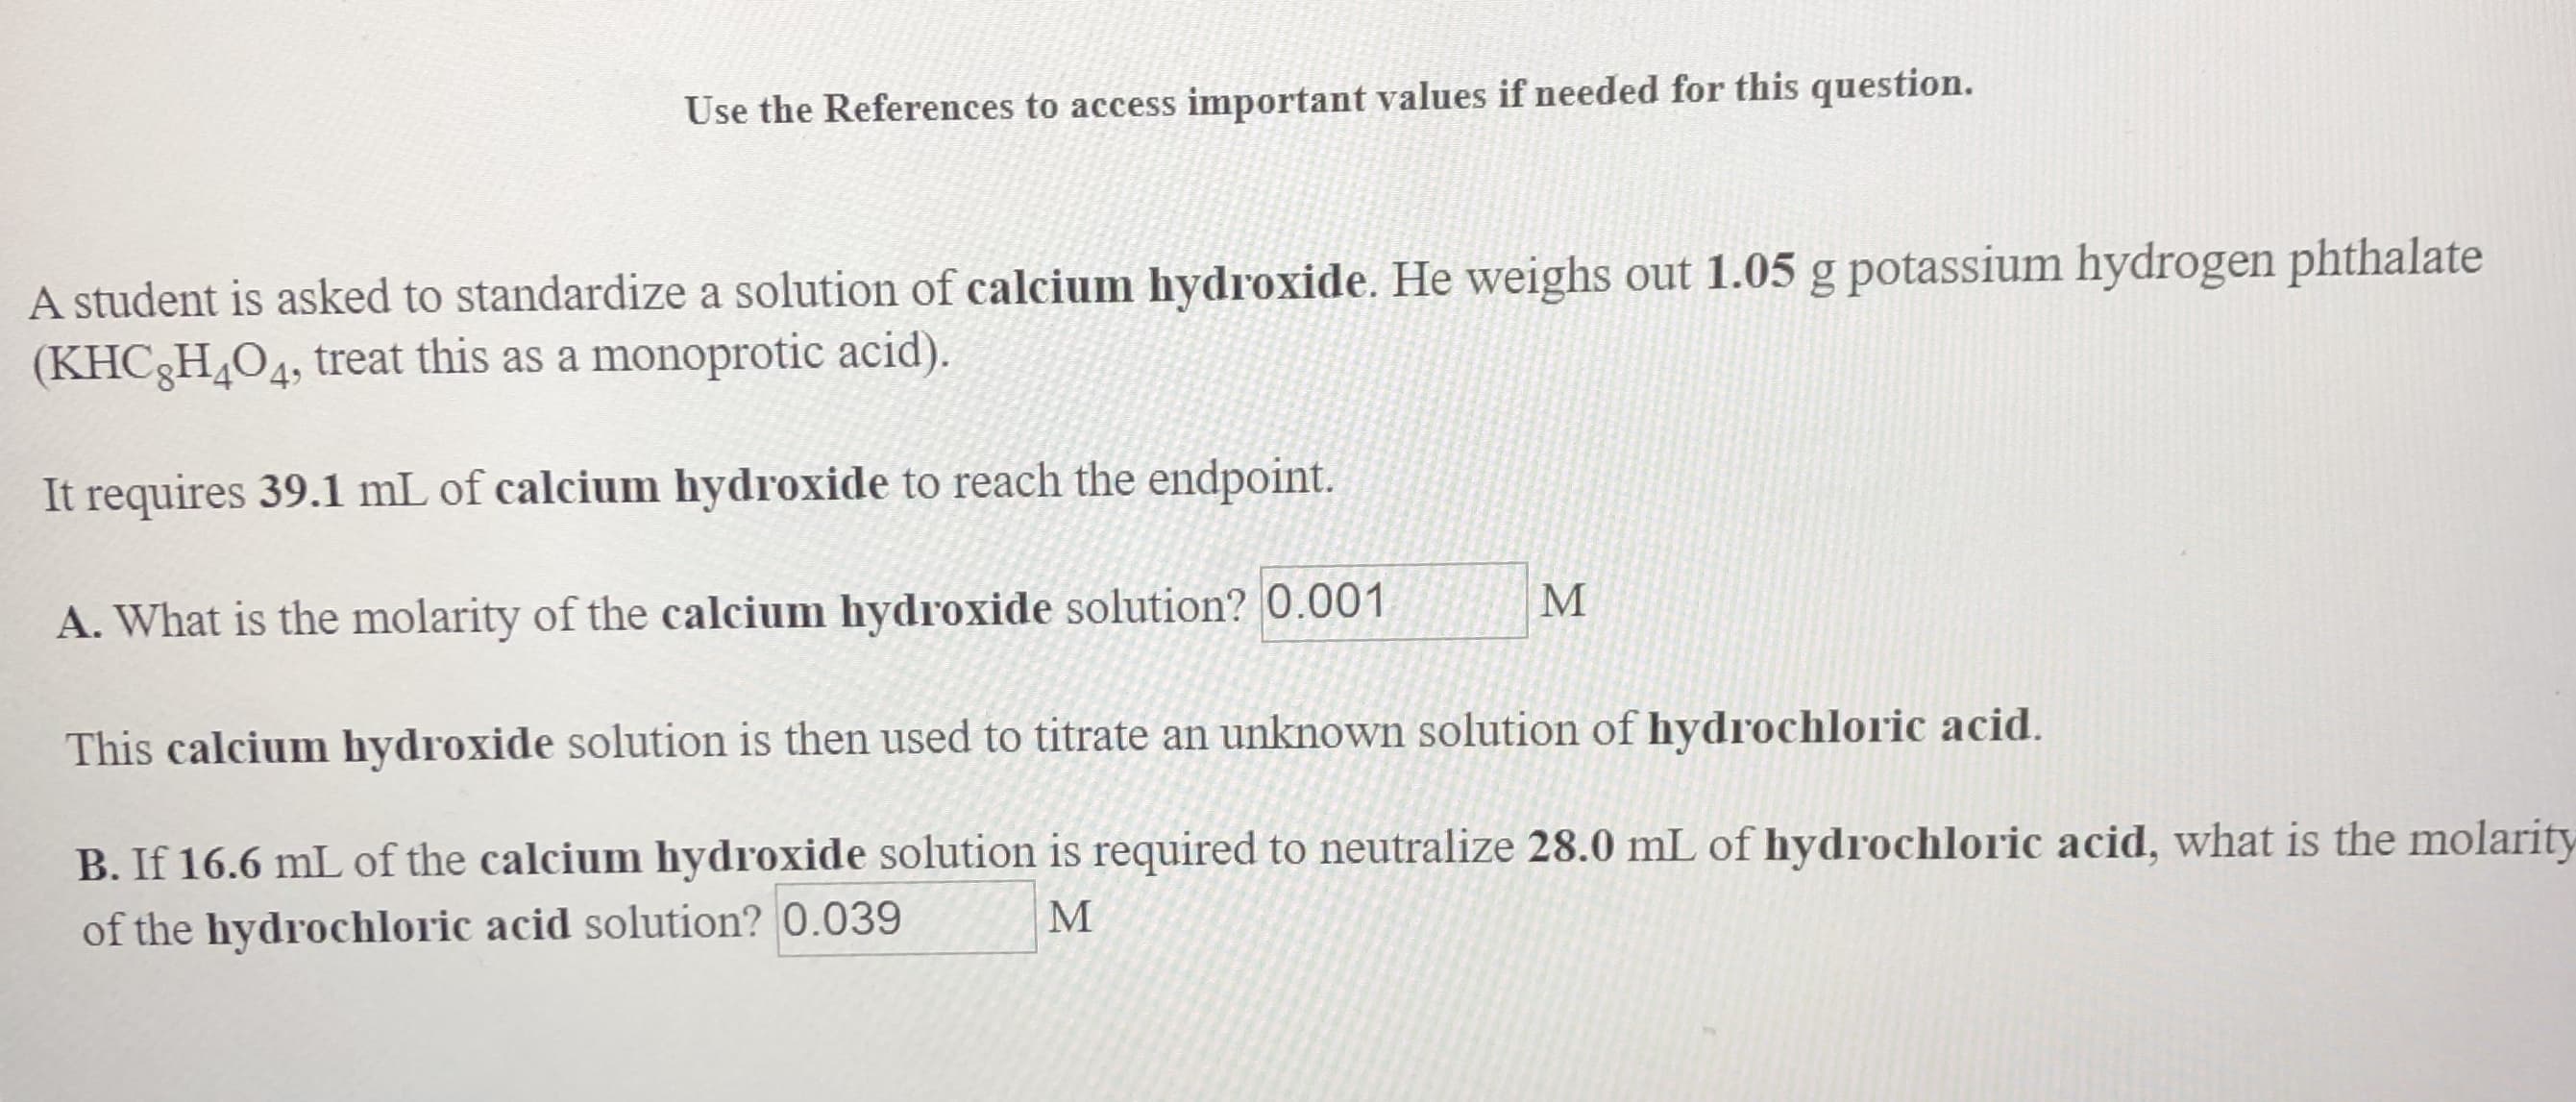 Use the References to access important values if needed for this question.
A student is asked to standardize a solution of calcium hydroxide. He weighs out 1.05 g potassium hydrogen phthalate
(KHC8H4O4, treat this as a monoprotic acid).
It requires 39.1 mL of calcium hydroxide to reach the endpoint.
М
A. What is the molarity of the calcium hydroxide solution? 0.001
This calcium hydroxide solution is then used to titrate an unknown solution of hydrochloric acid.
B. If 16.6 mLof the calcium hydroxide solution is required to neutralize 28.0 mL of hydrochloric acid, what is the molarity
М
of the hydrochloric acid solution? 0.039
